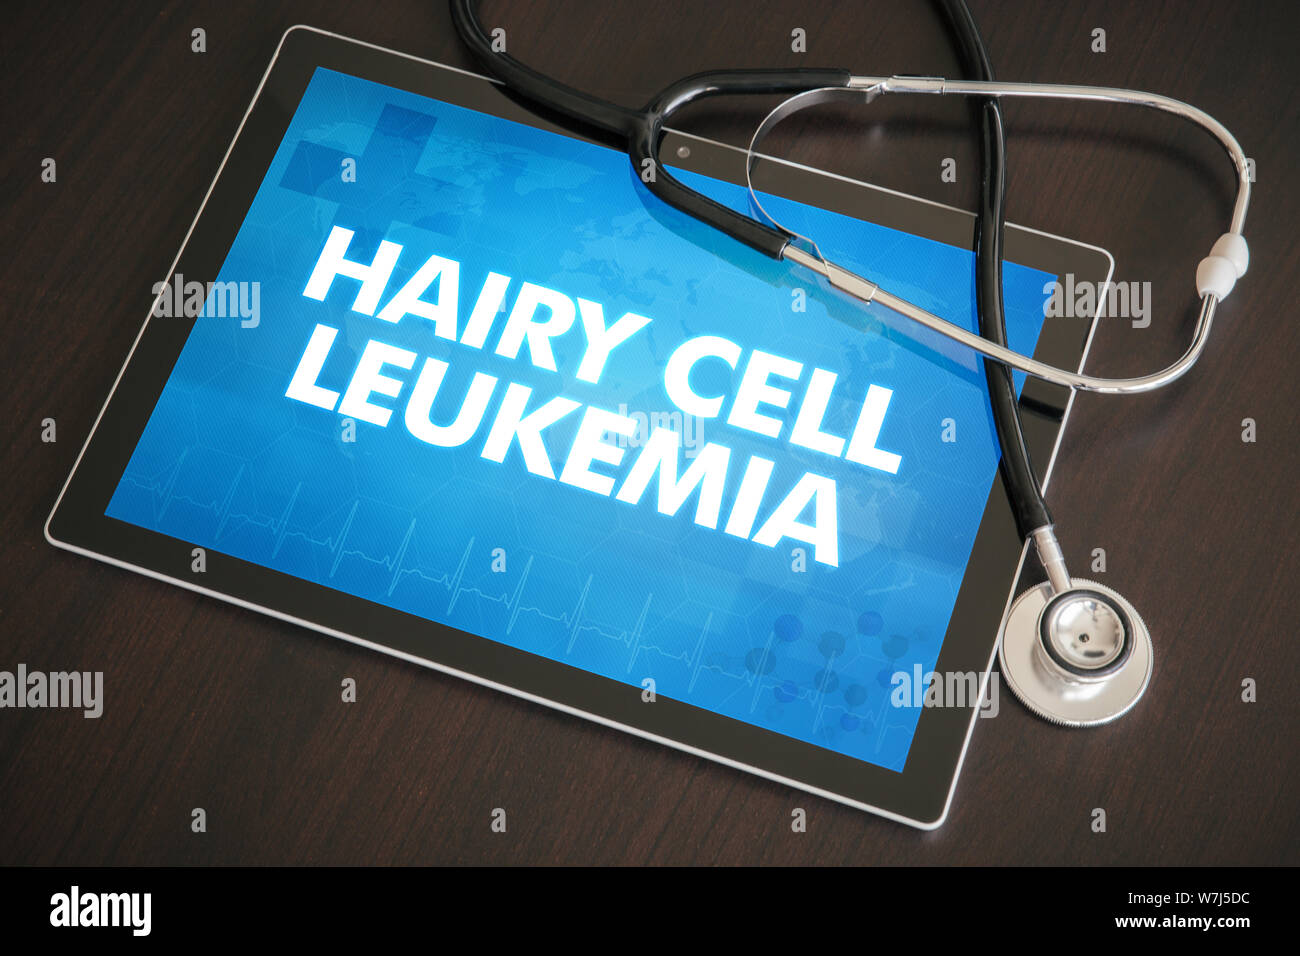 Hairy cell leukemia (cancer type) diagnosis medical concept on tablet screen with stethoscope. Stock Photo